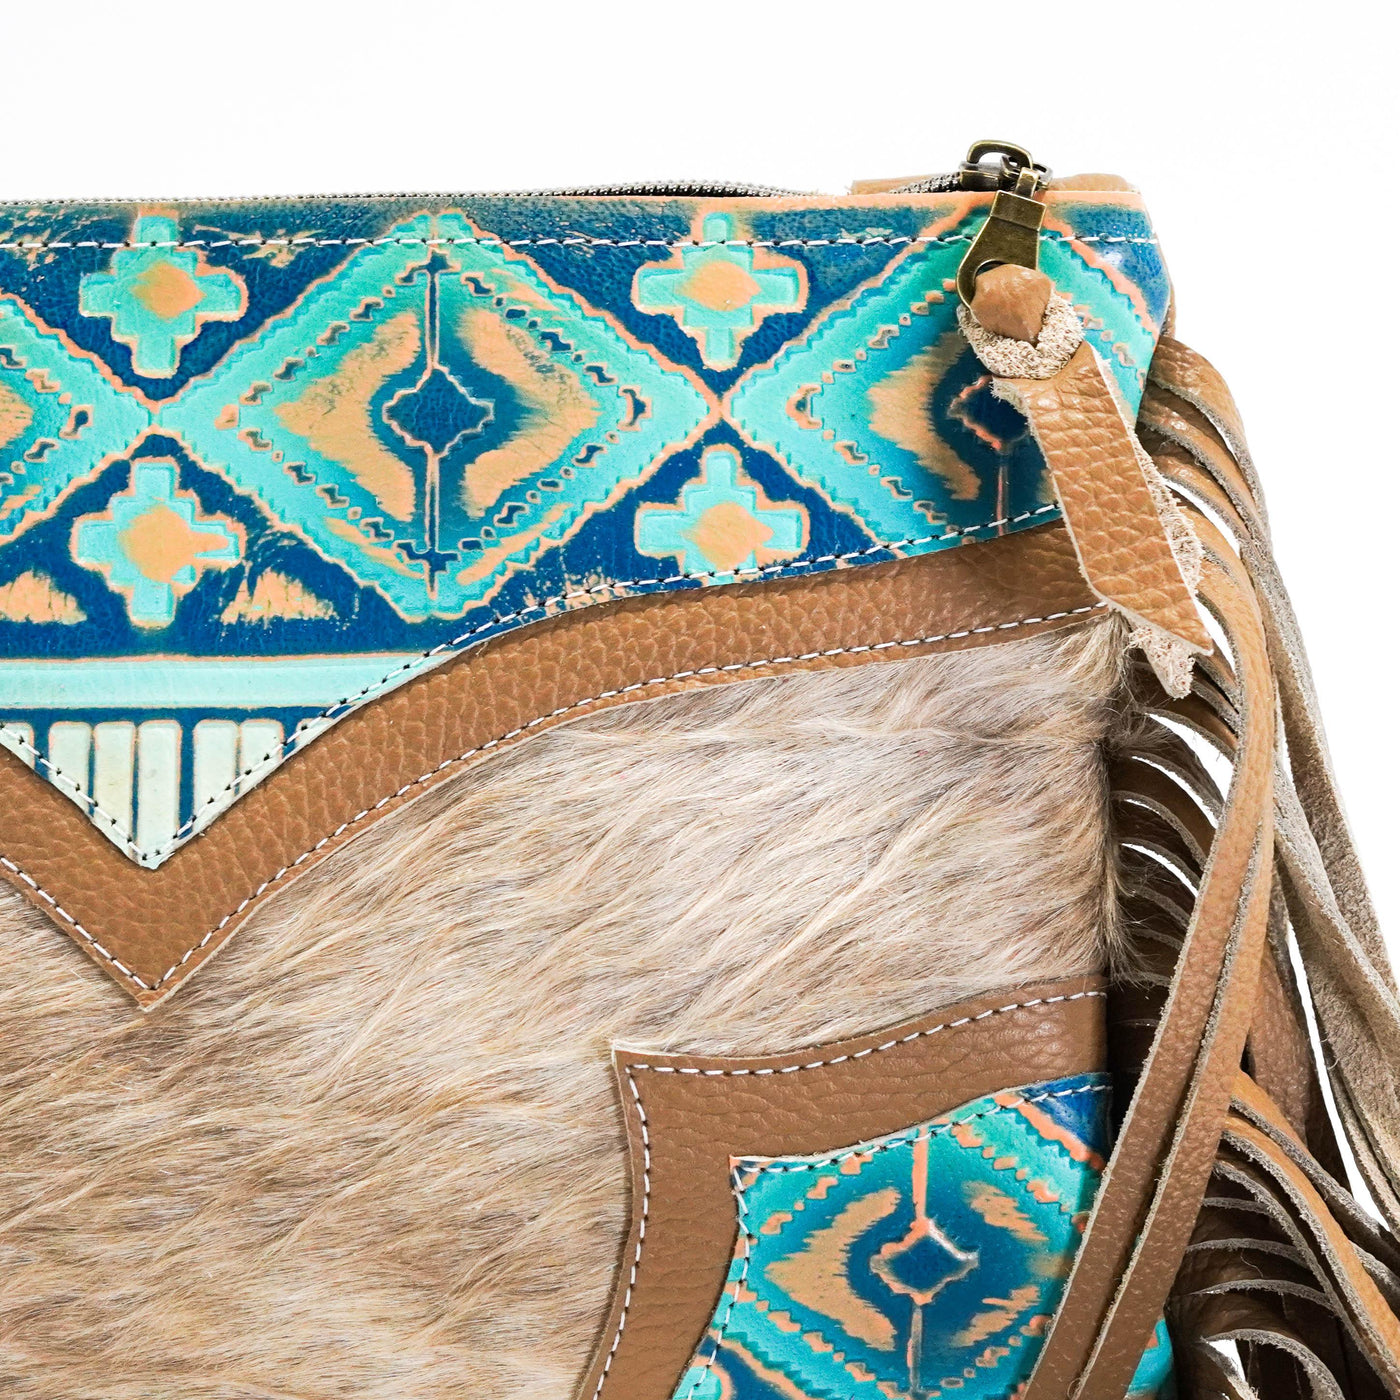 Patsy - Exotic w/ Margaritaville Navajo-Patsy-Western-Cowhide-Bags-Handmade-Products-Gifts-Dancing Cactus Designs